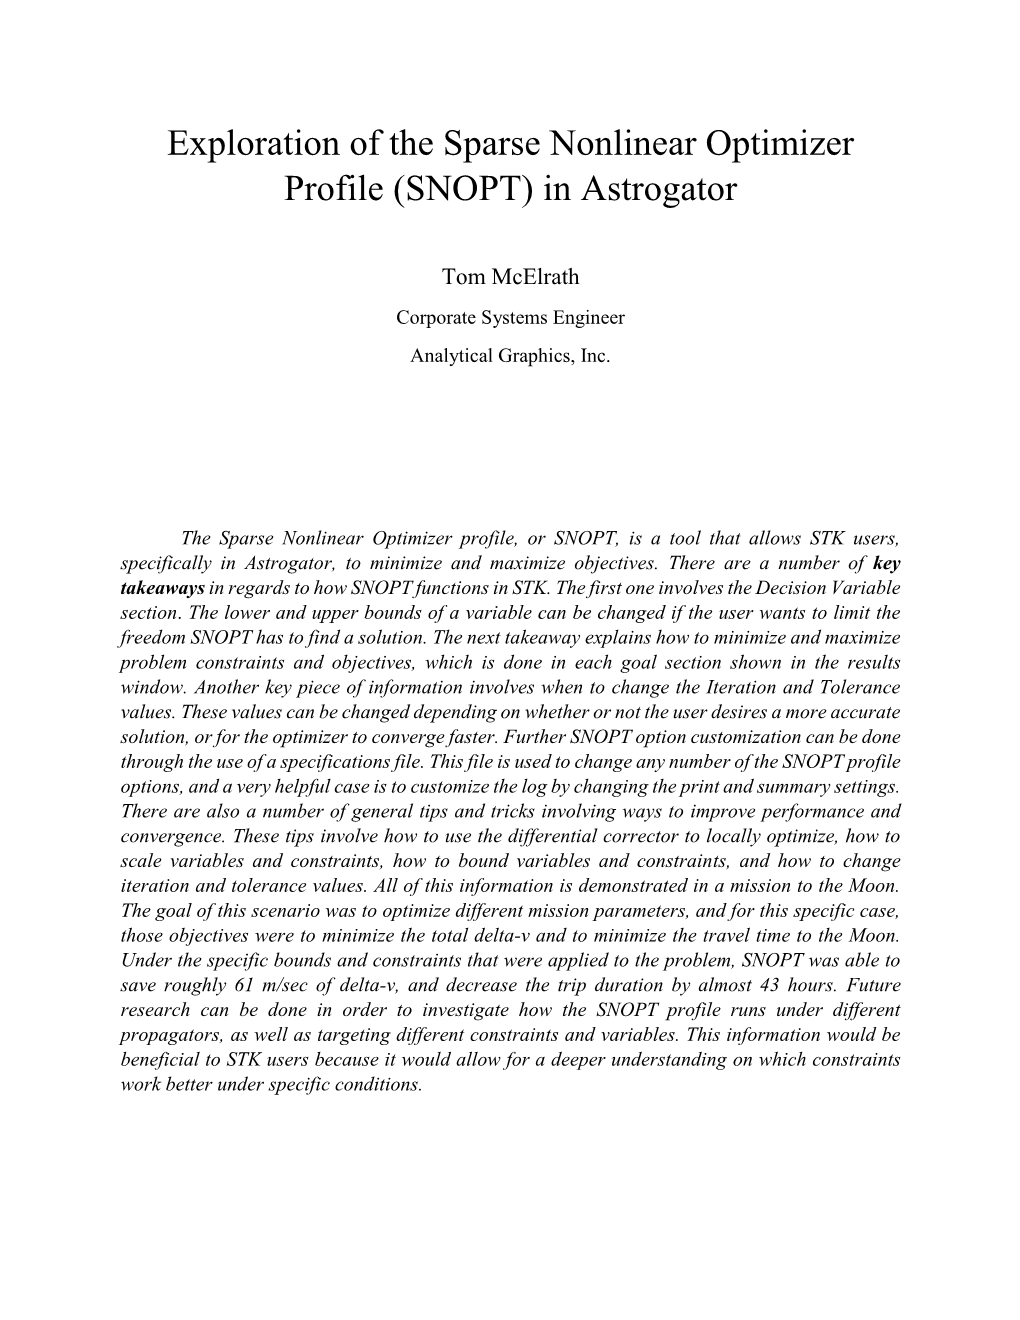 Exploration of the Sparse Nonlinear Optimizer Profile (SNOPT) in Astrogator